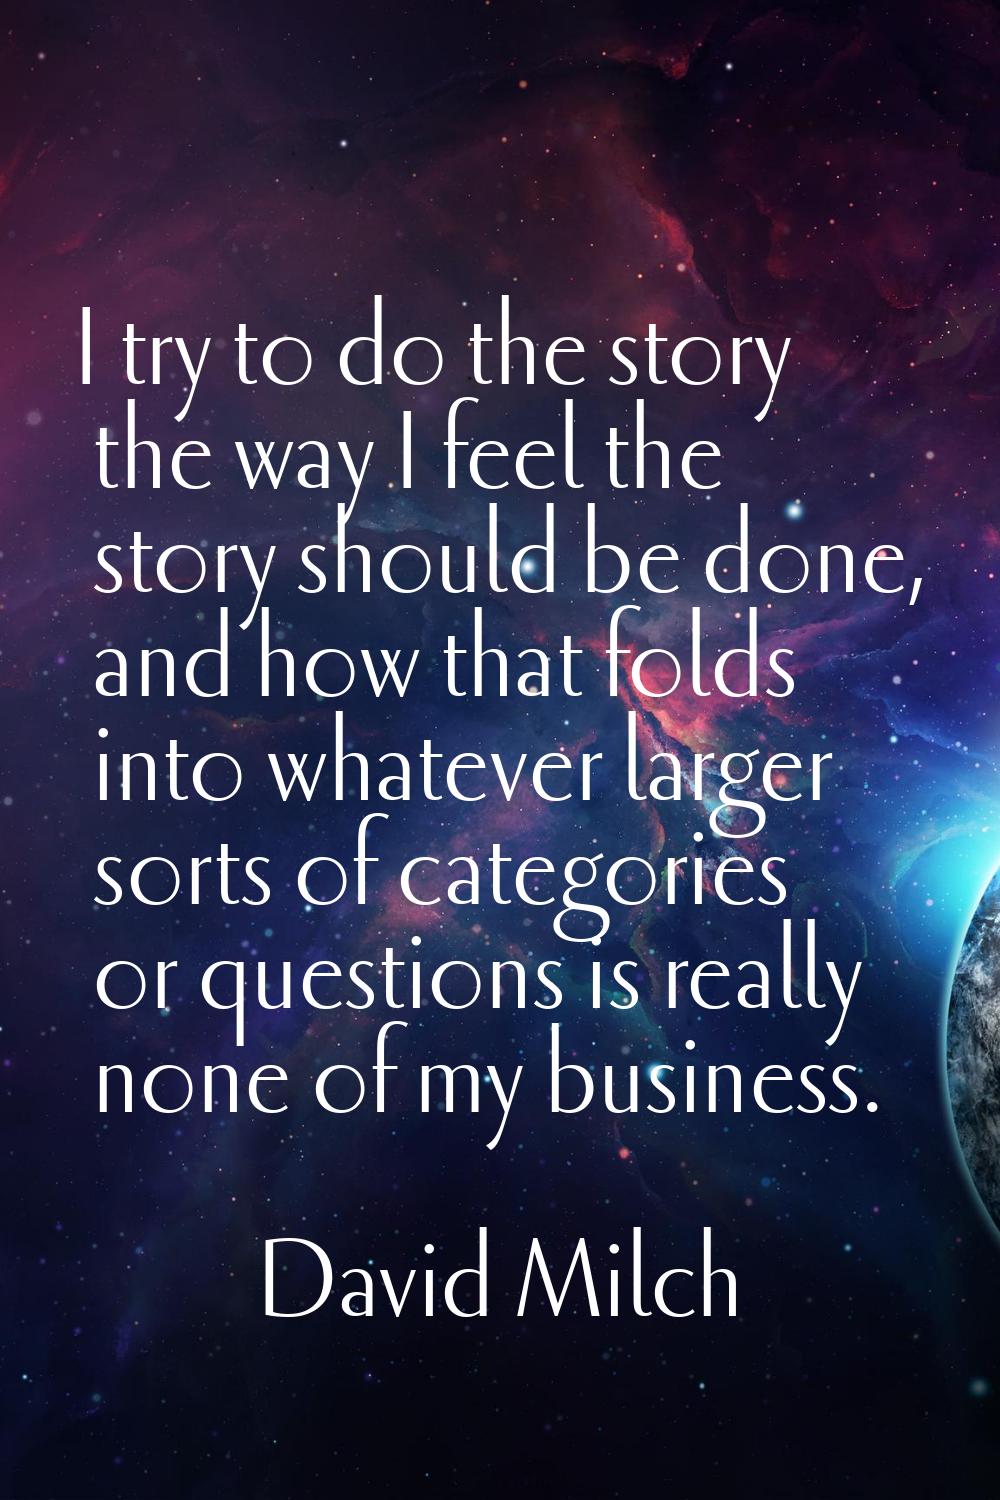 I try to do the story the way I feel the story should be done, and how that folds into whatever lar